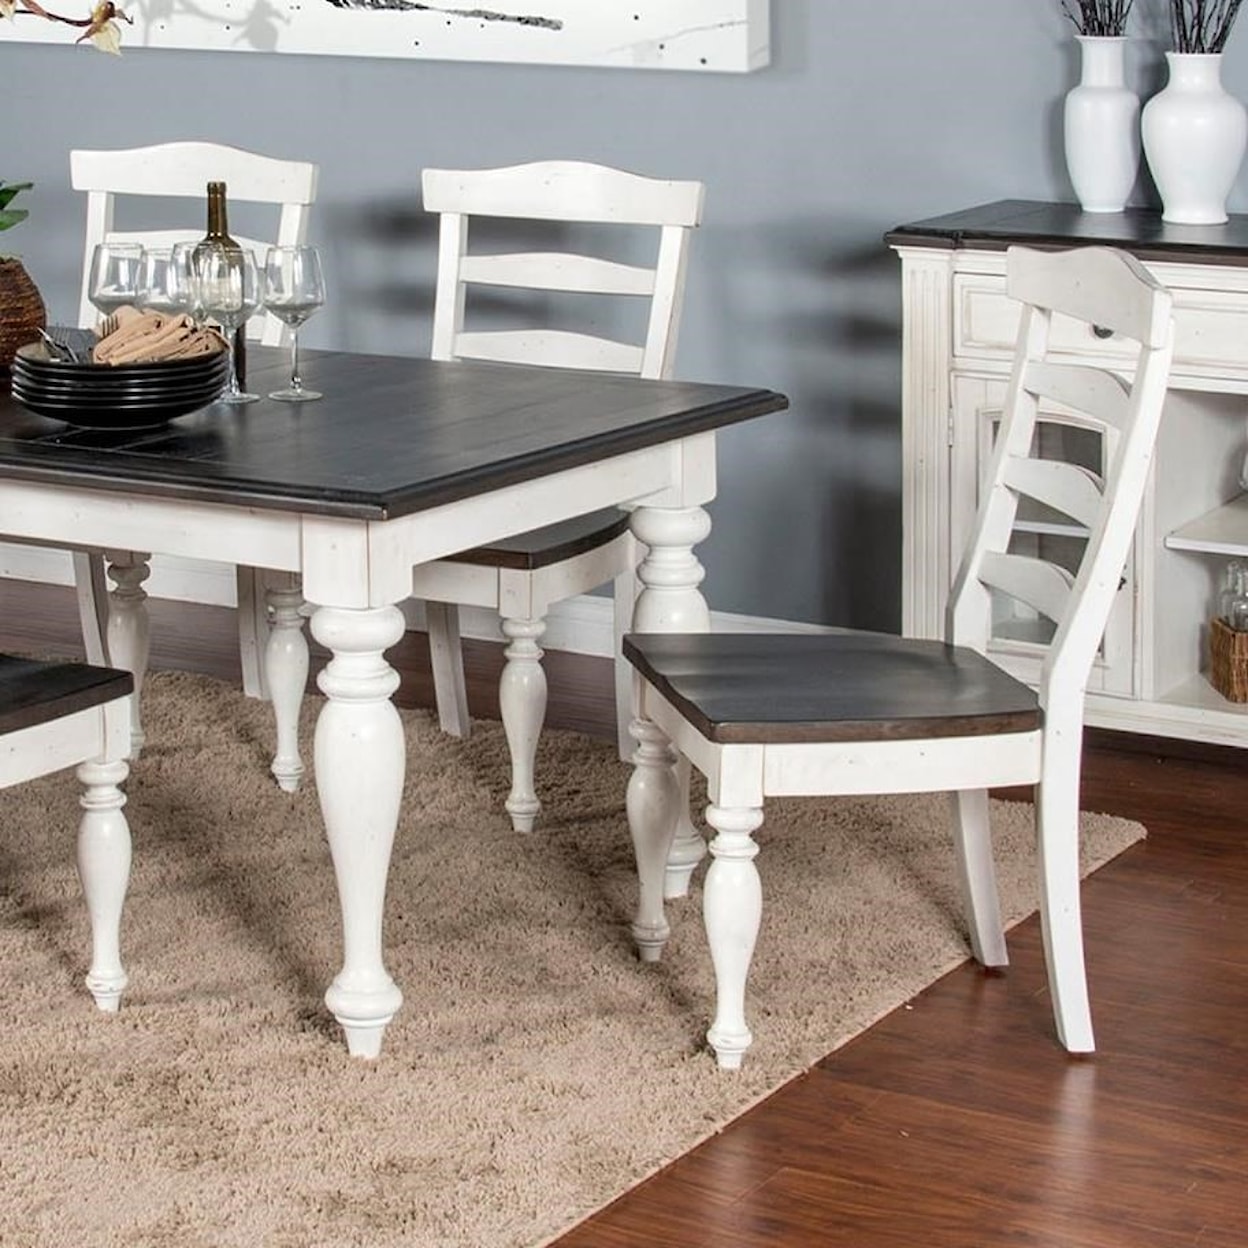 Sunny Designs Carriage House Five Piece Dining Set